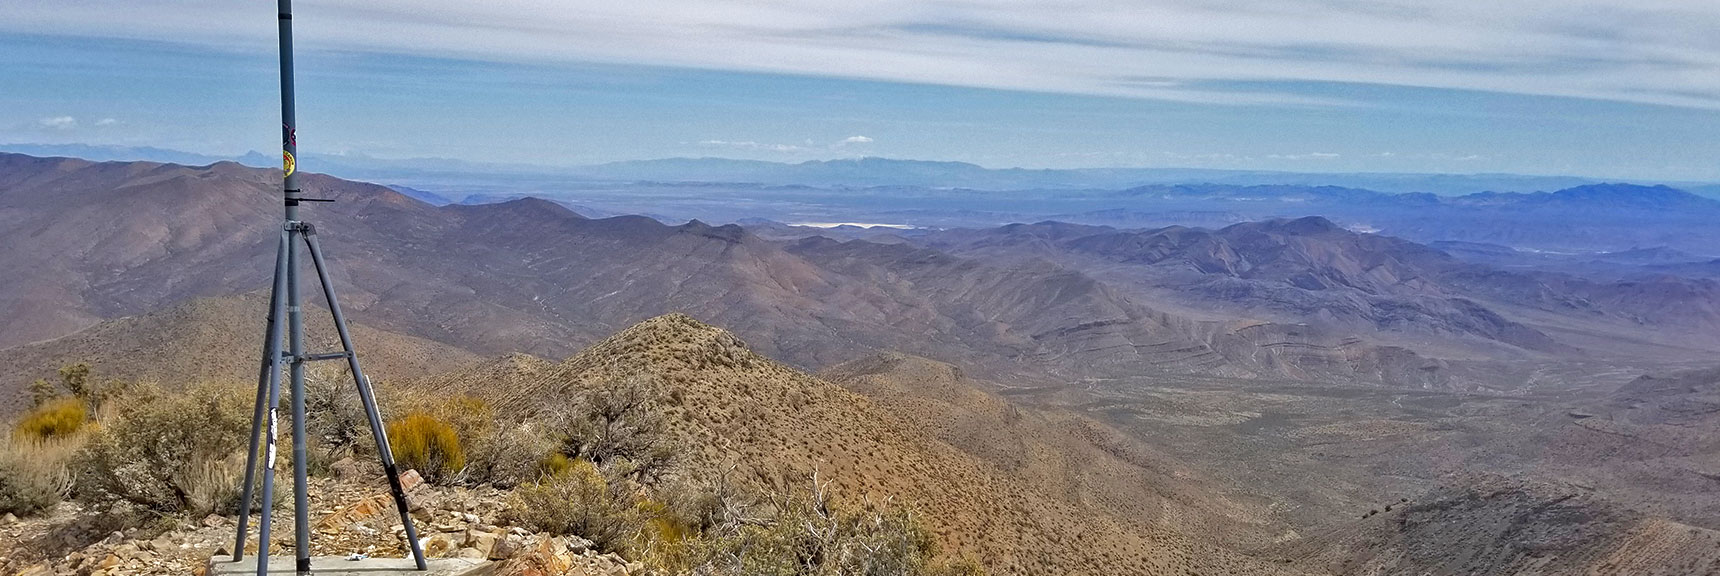 View Southeast from Gass Peak Eastern Summit | Gass Peak Eastern Summit Ultra-marathon Adventure, Nevada